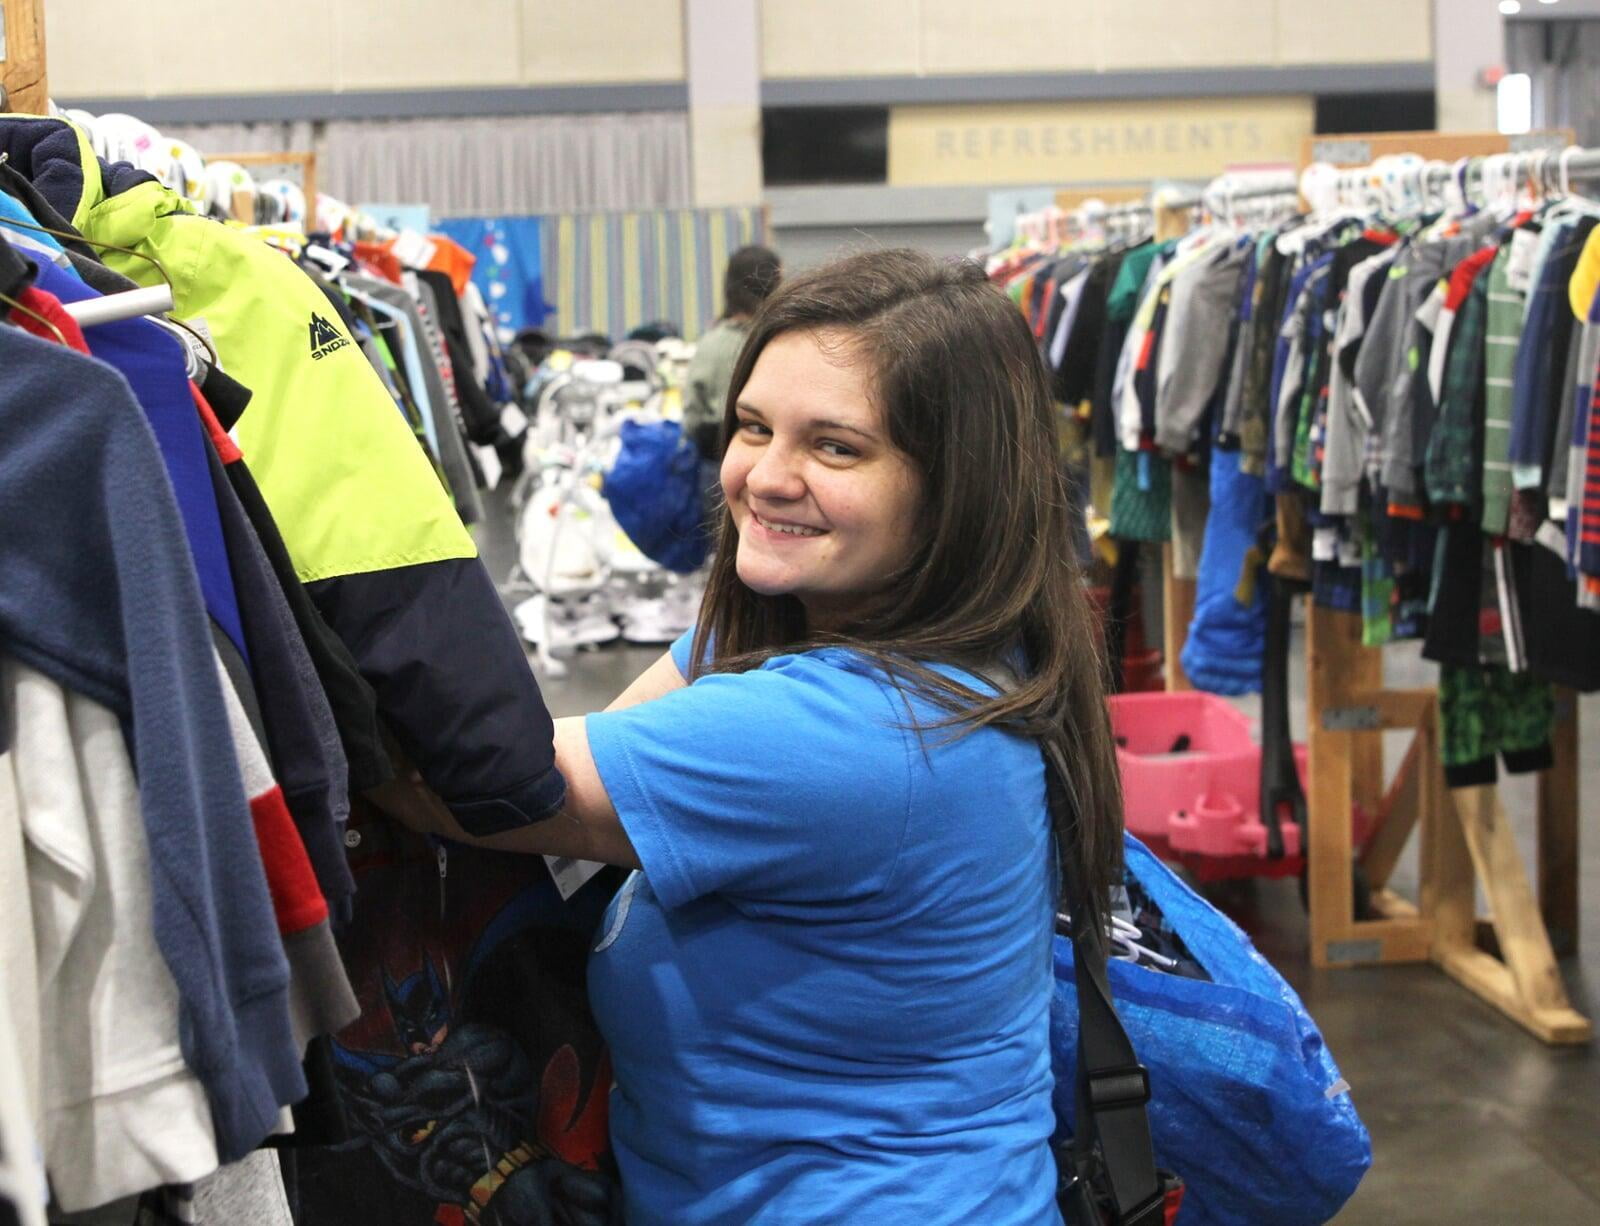 A JBF of Overland Park shopper looking through clothes